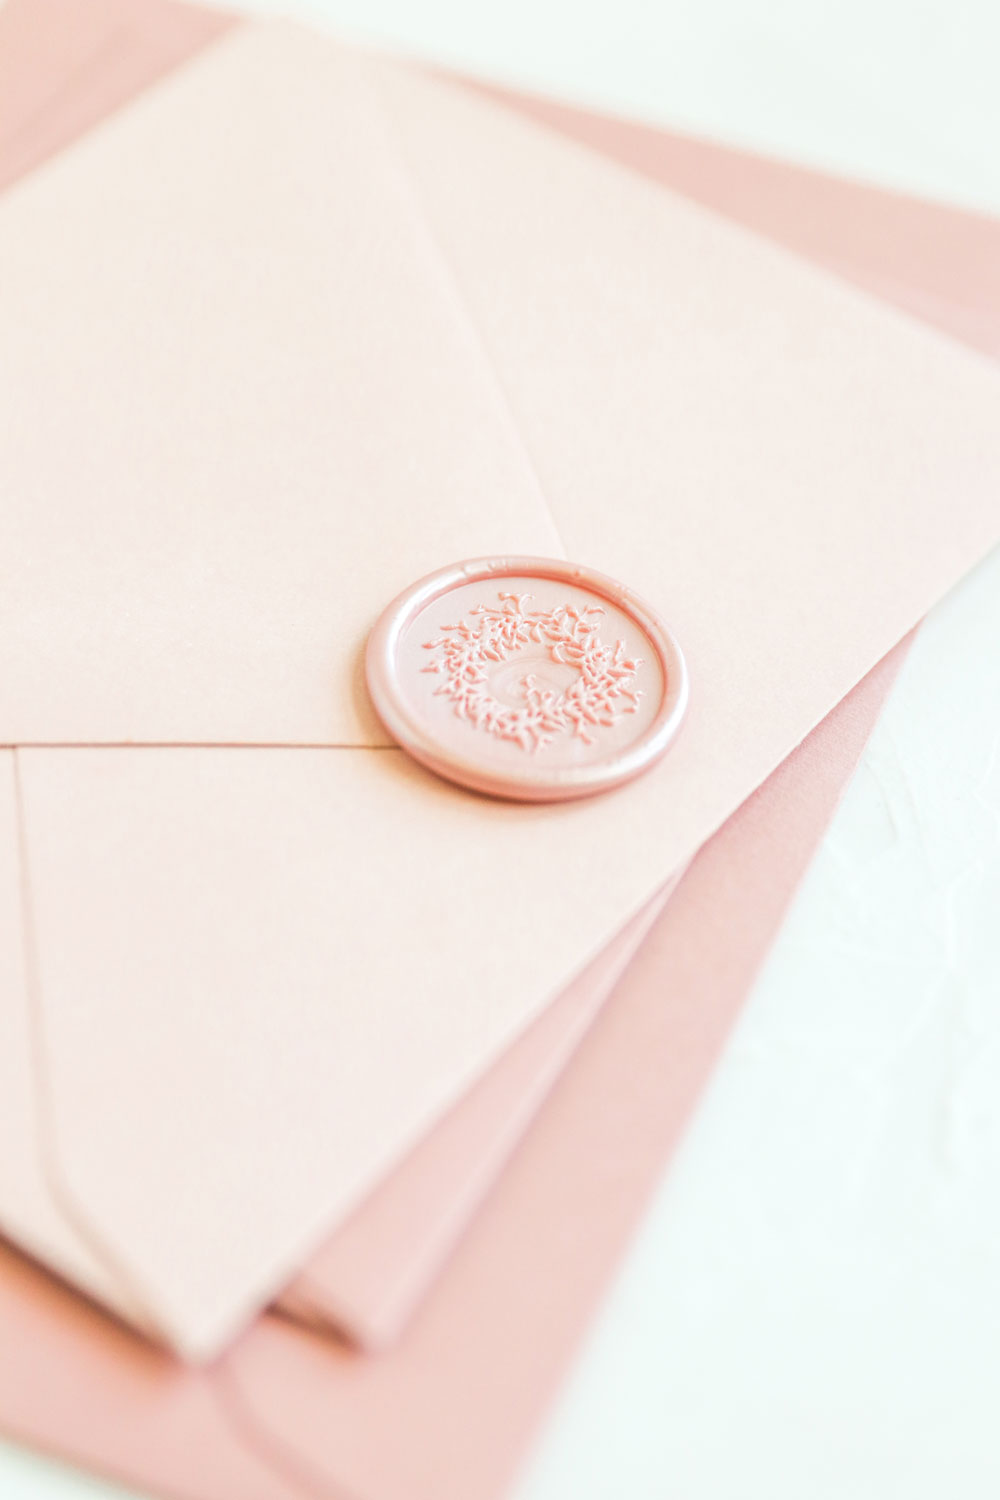 We've heard all the horror stories: those expensive wedding invitations end up crumpled, smudged or torn to shreds in the mail. If you'd like to protect your invites, you might want to hand cancel your invites for peace of mind. Here's how to hand cancel mail the right way.